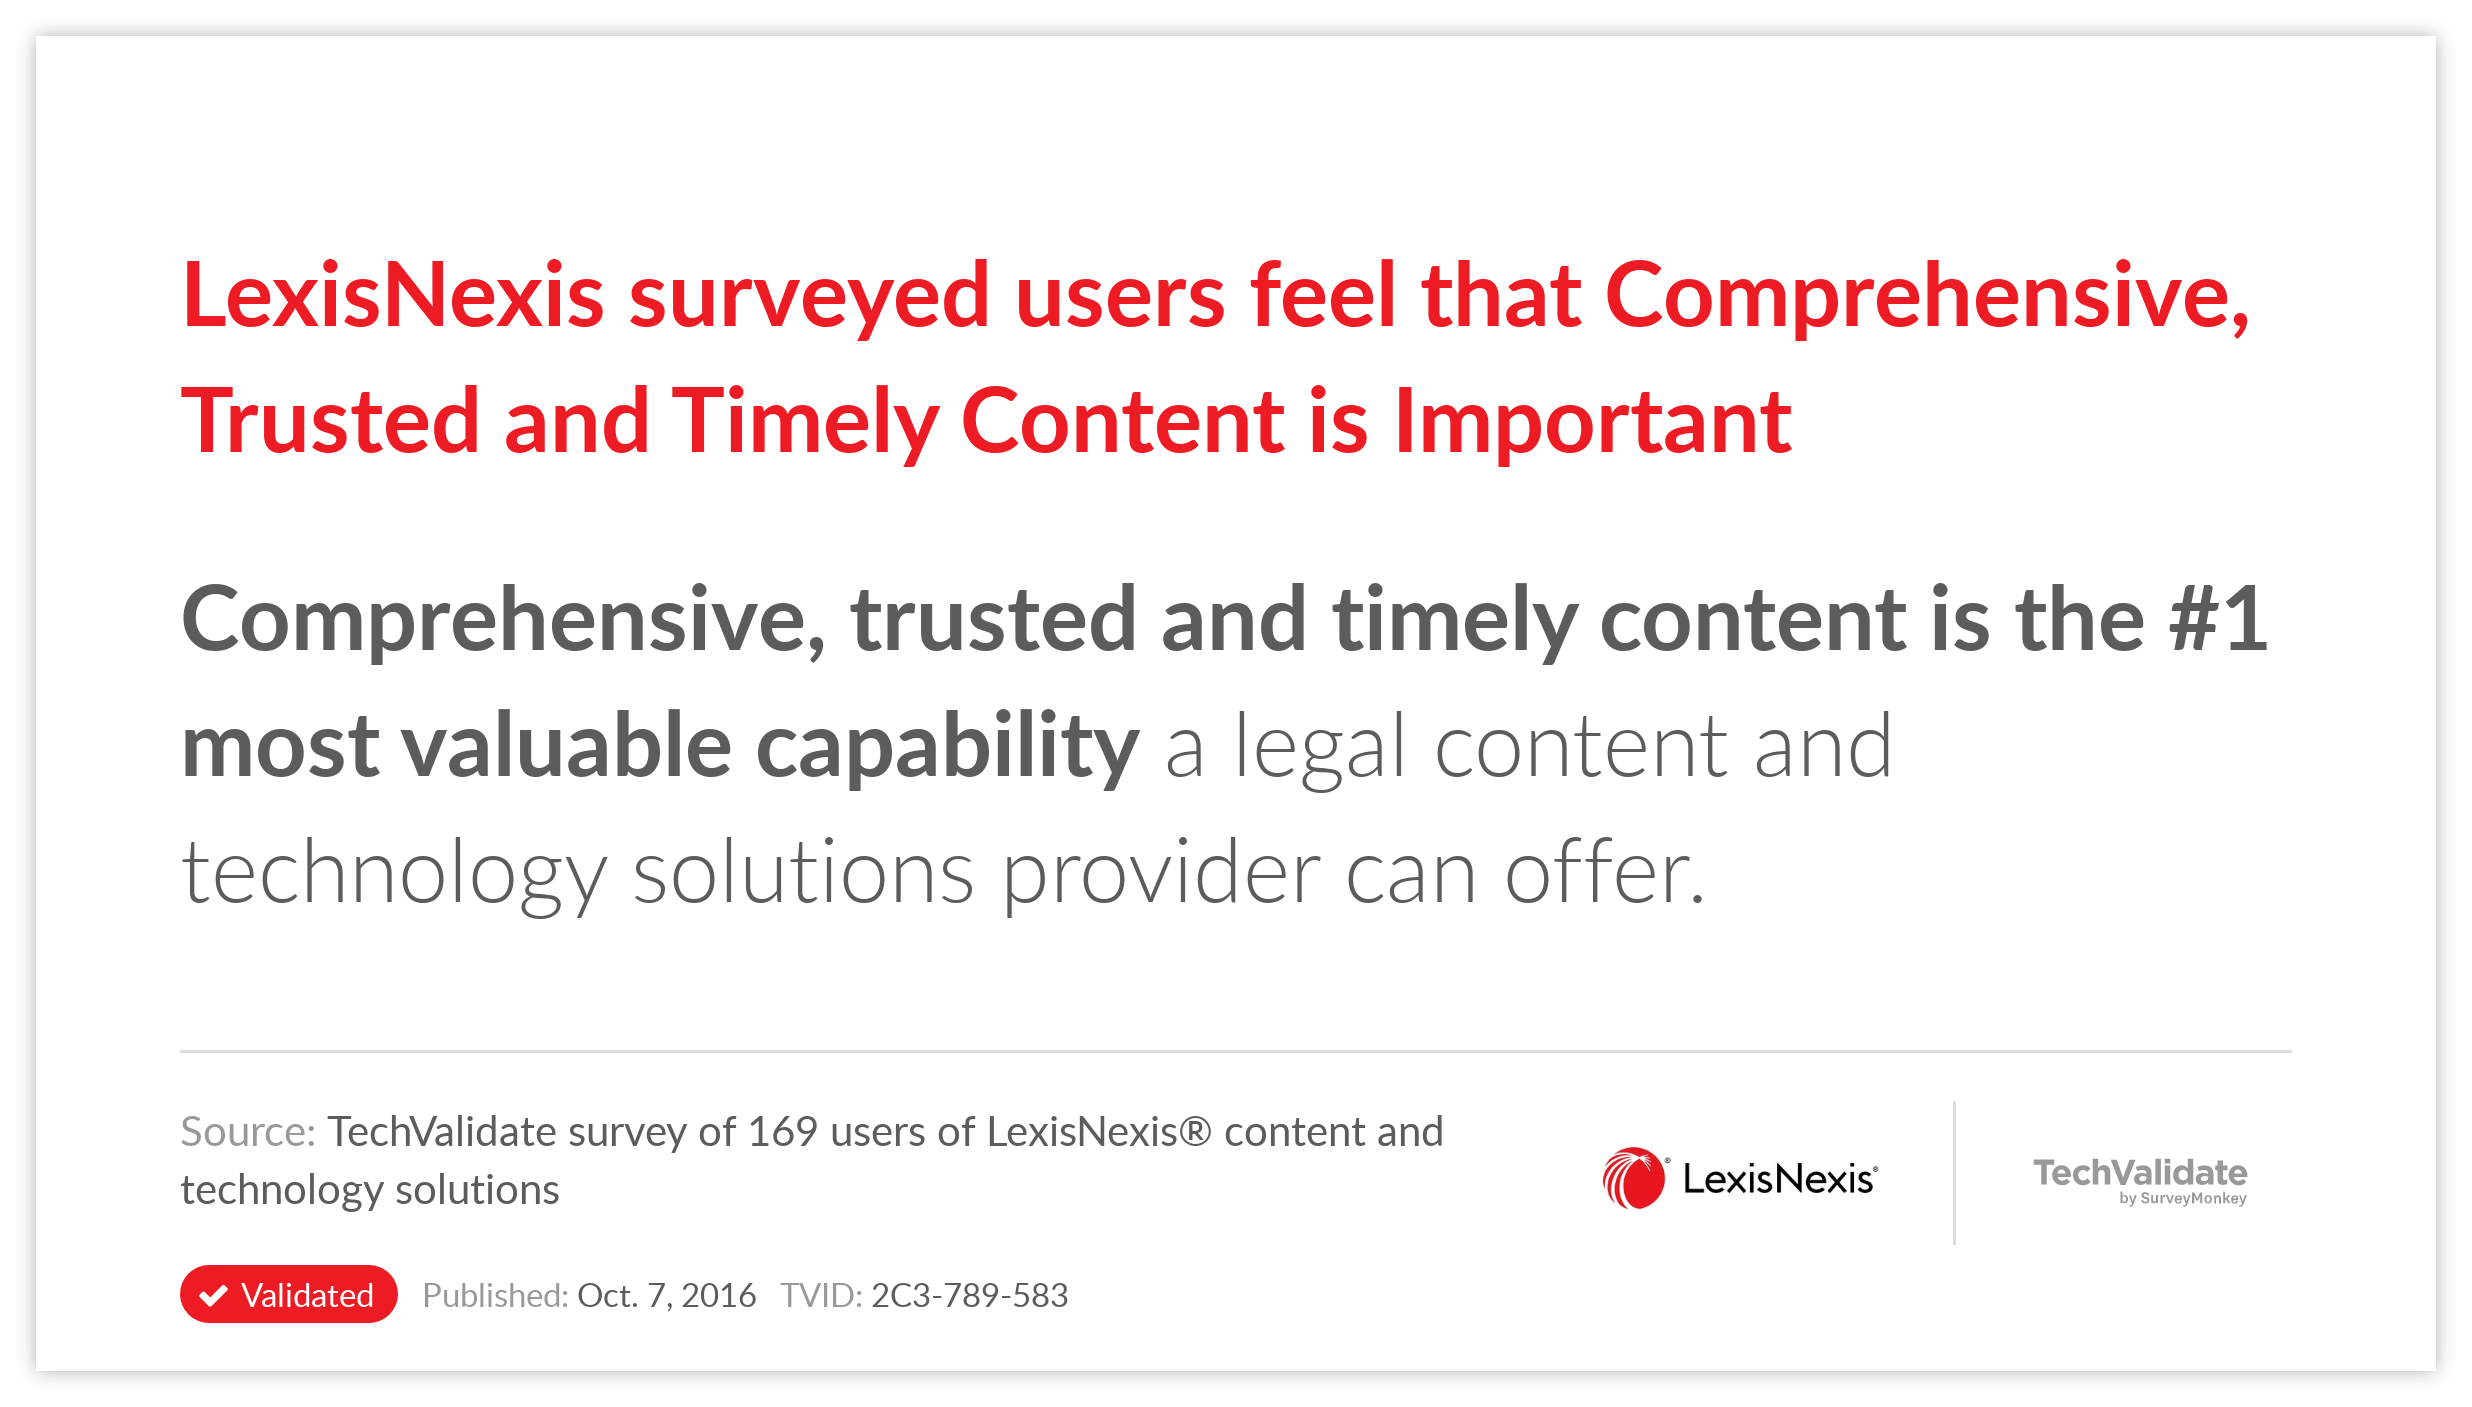 LexisNexis surveyed users feel that Comprehensive, Trusted and Timely Content is Important